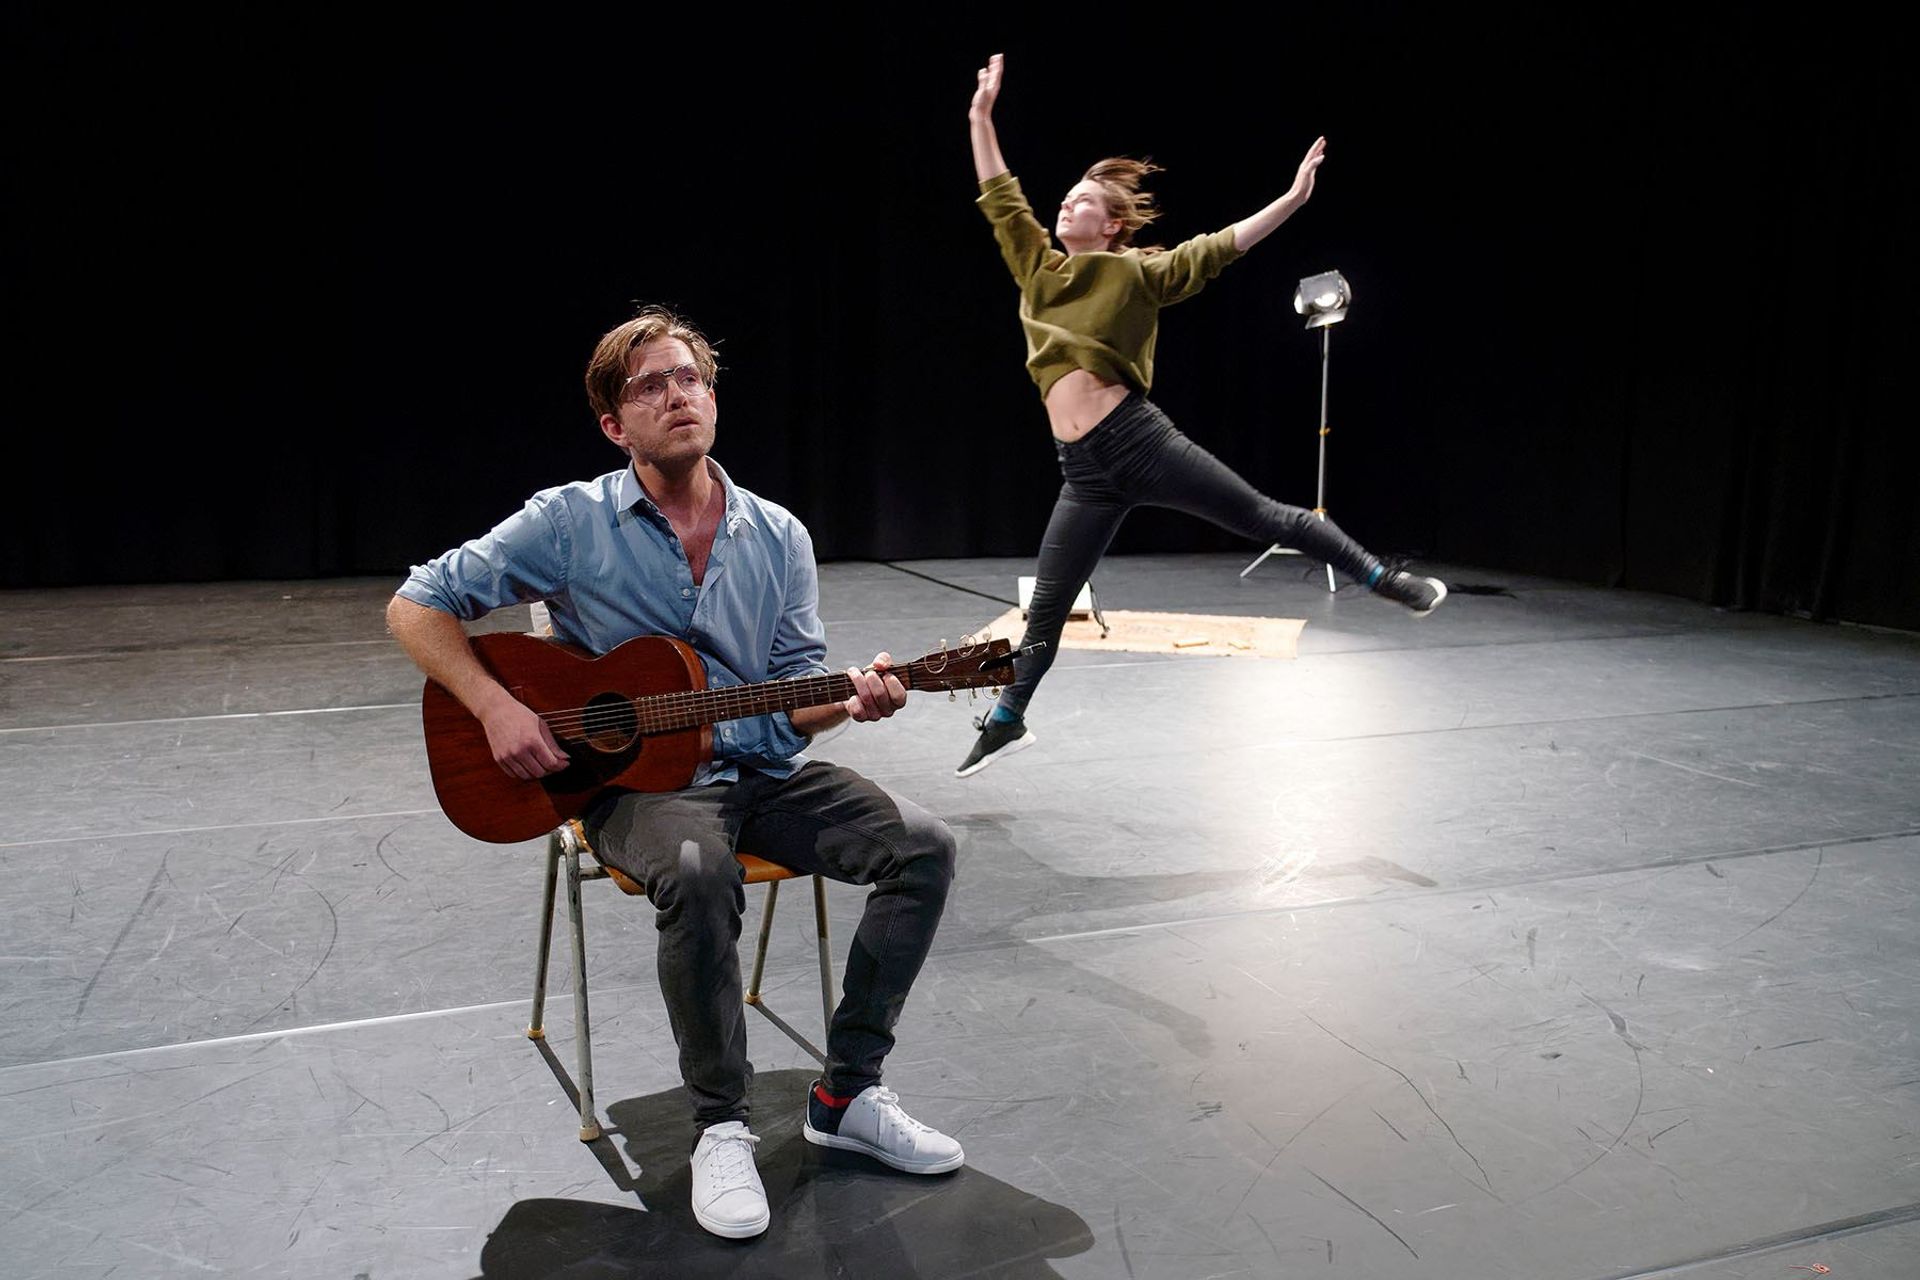 Lasse is seated on a chair with a guitar on his lap, singing and playing. Ingrid is in the background, jumping in the midst of a dance.